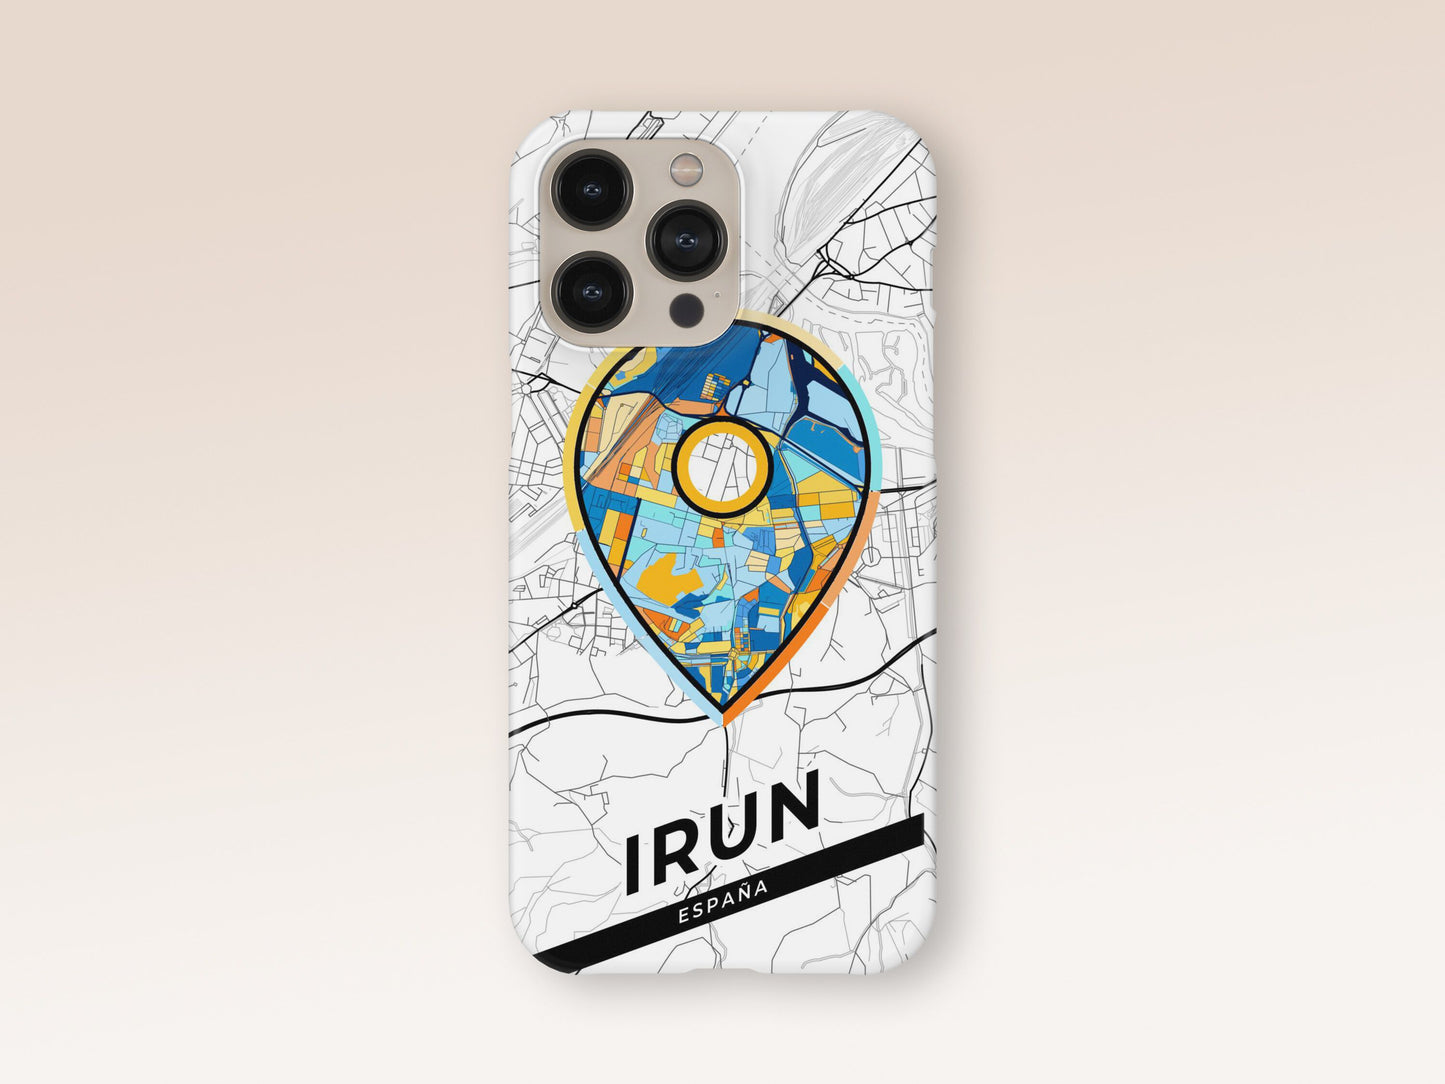 Irun Spain slim phone case with colorful icon. Birthday, wedding or housewarming gift. Couple match cases. 1